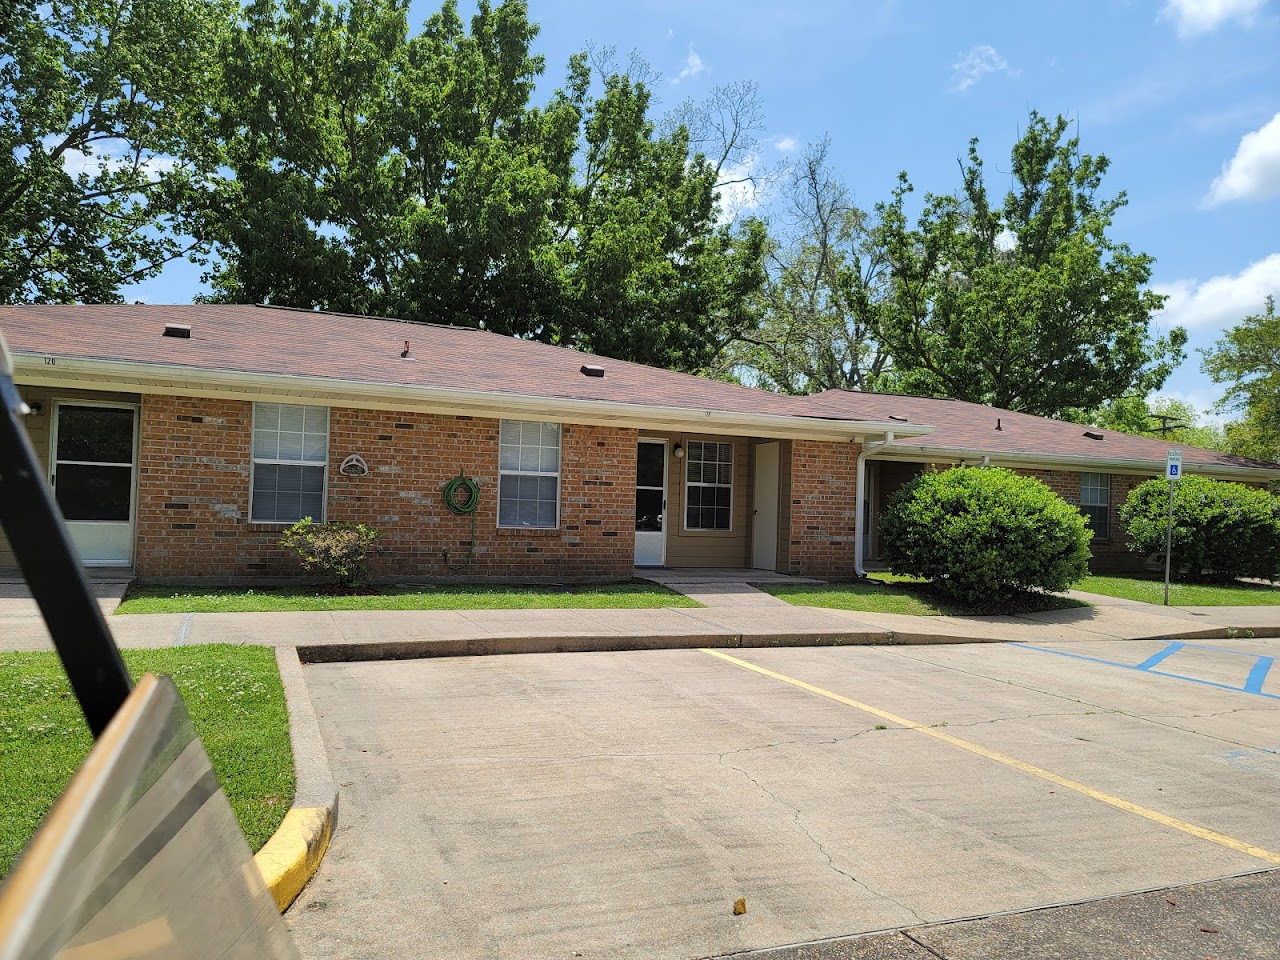 Photo of V B APTS. Affordable housing located at 720 ADDISON ST MARKSVILLE, LA 71351